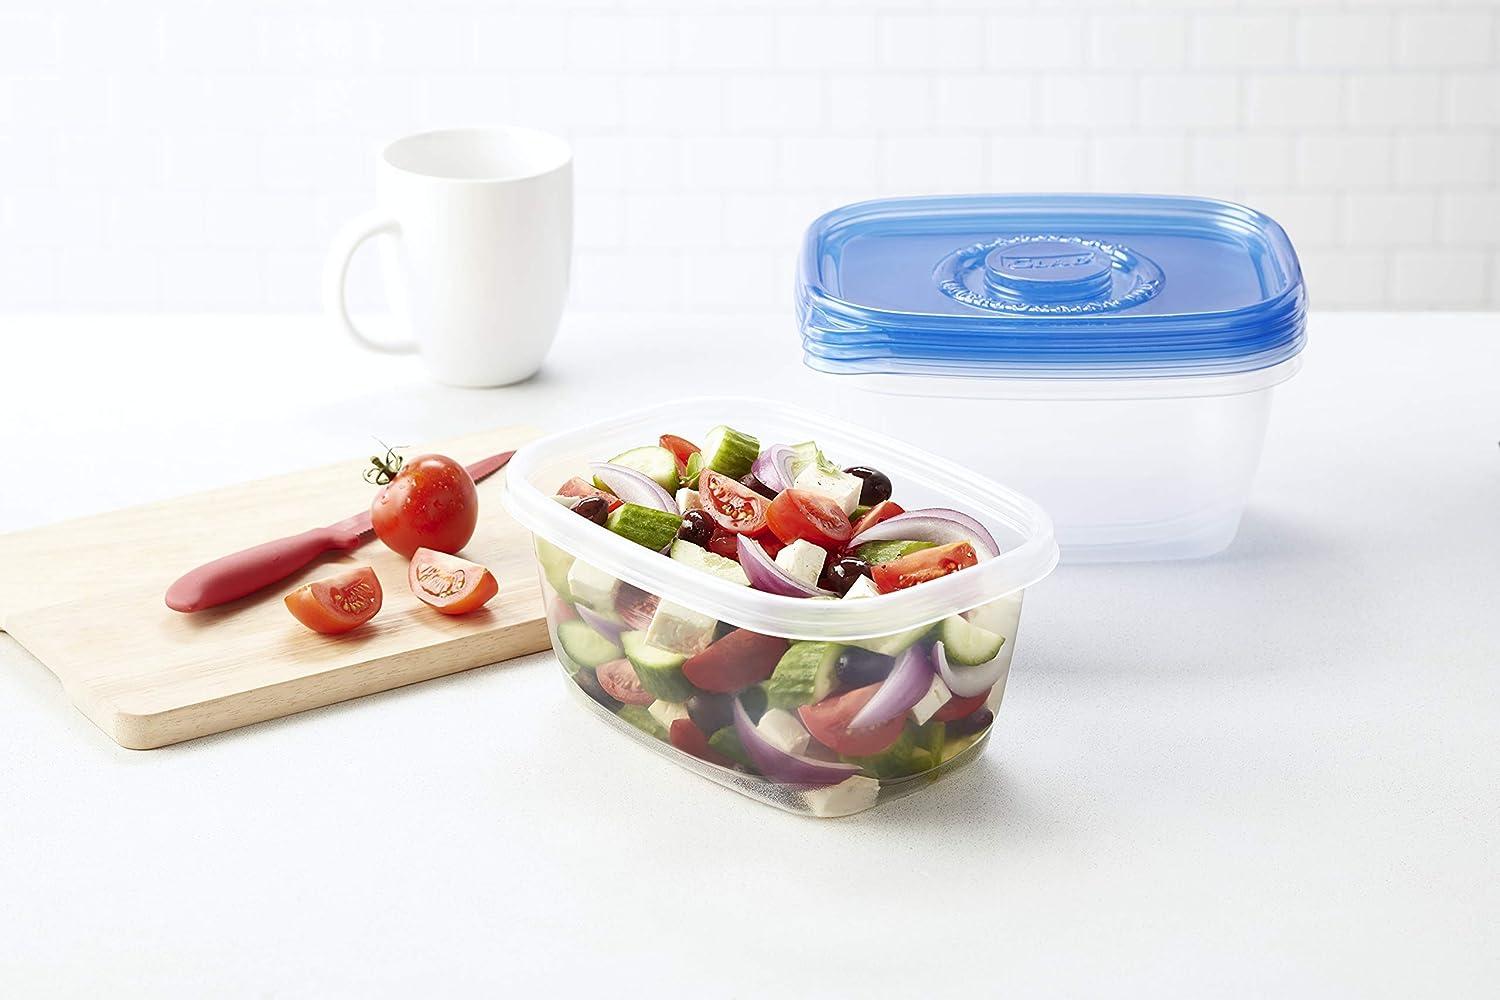 Large Rectangle Food Storage, Food Containers Hold up to 64 Ounces of Food - Glad